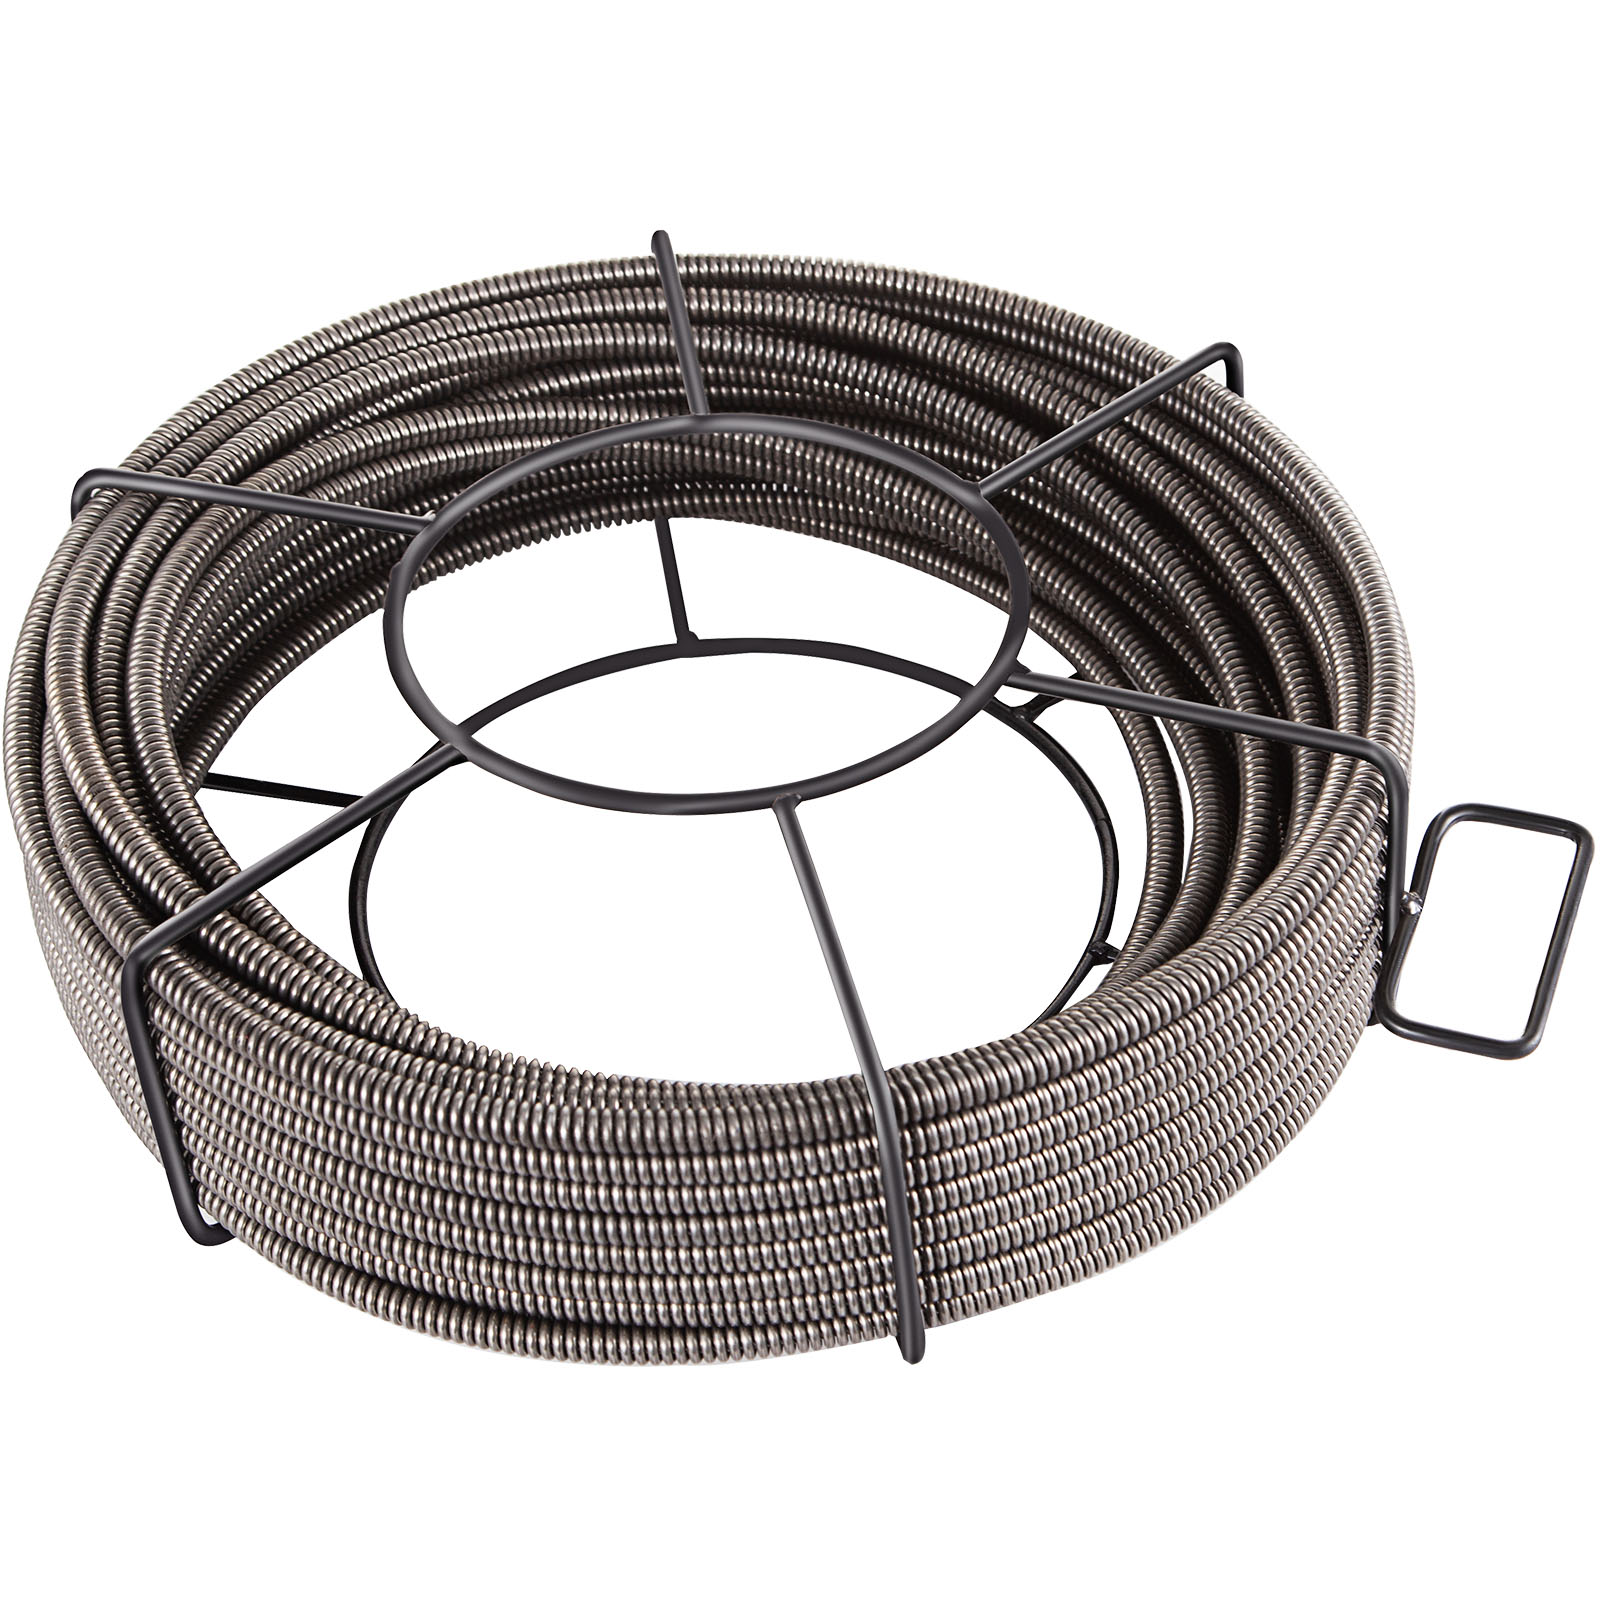 VEVORbrand Drain Cleaning Cable 75 Feet x 1/2 inch Solid Core Cable Sewer  Cable Drain Auger Cable Cleaner Snake